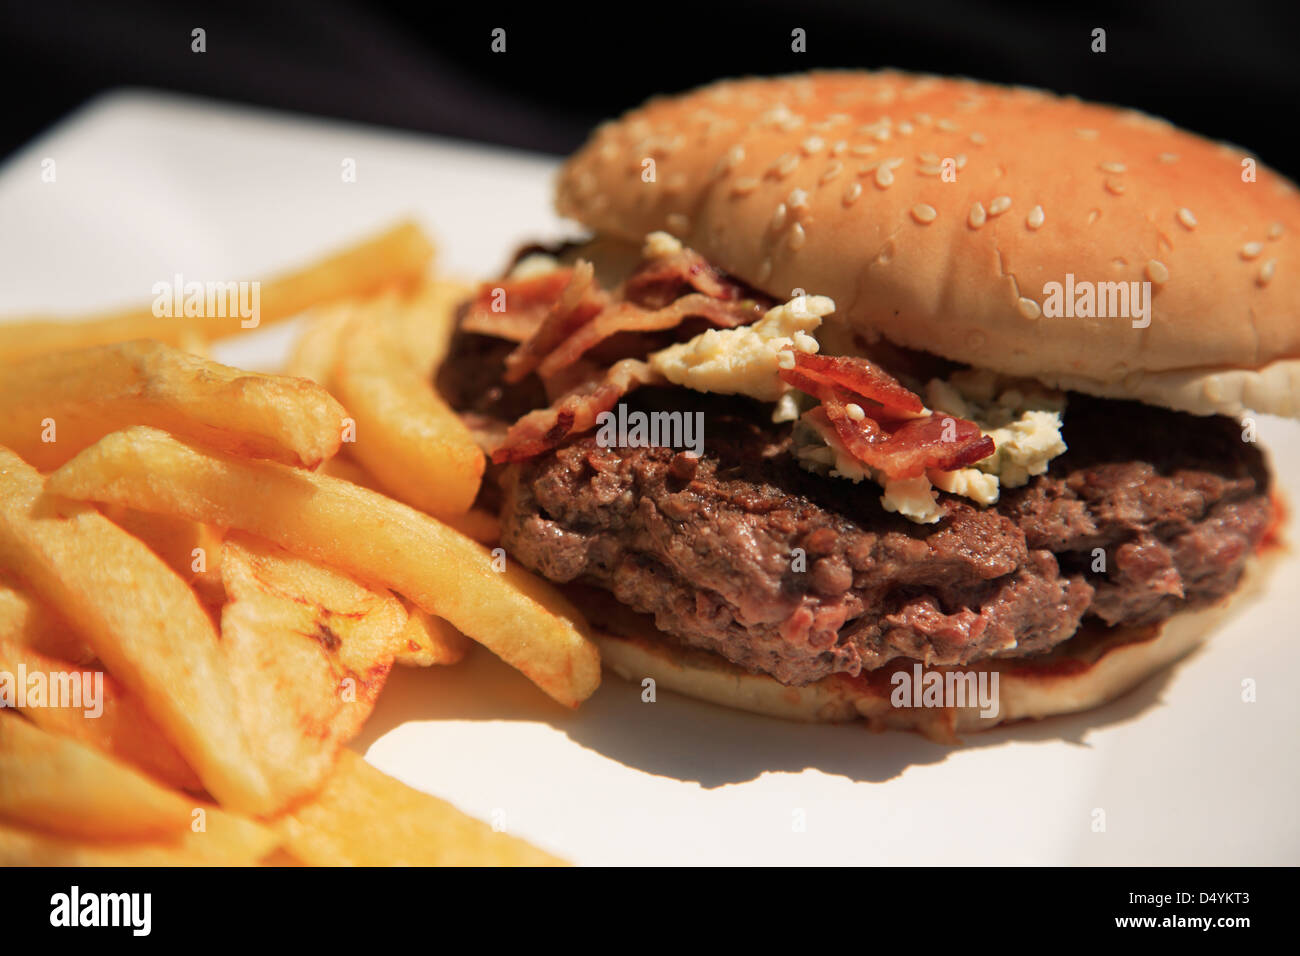 Bacon and blue cheese burger Stock Photo